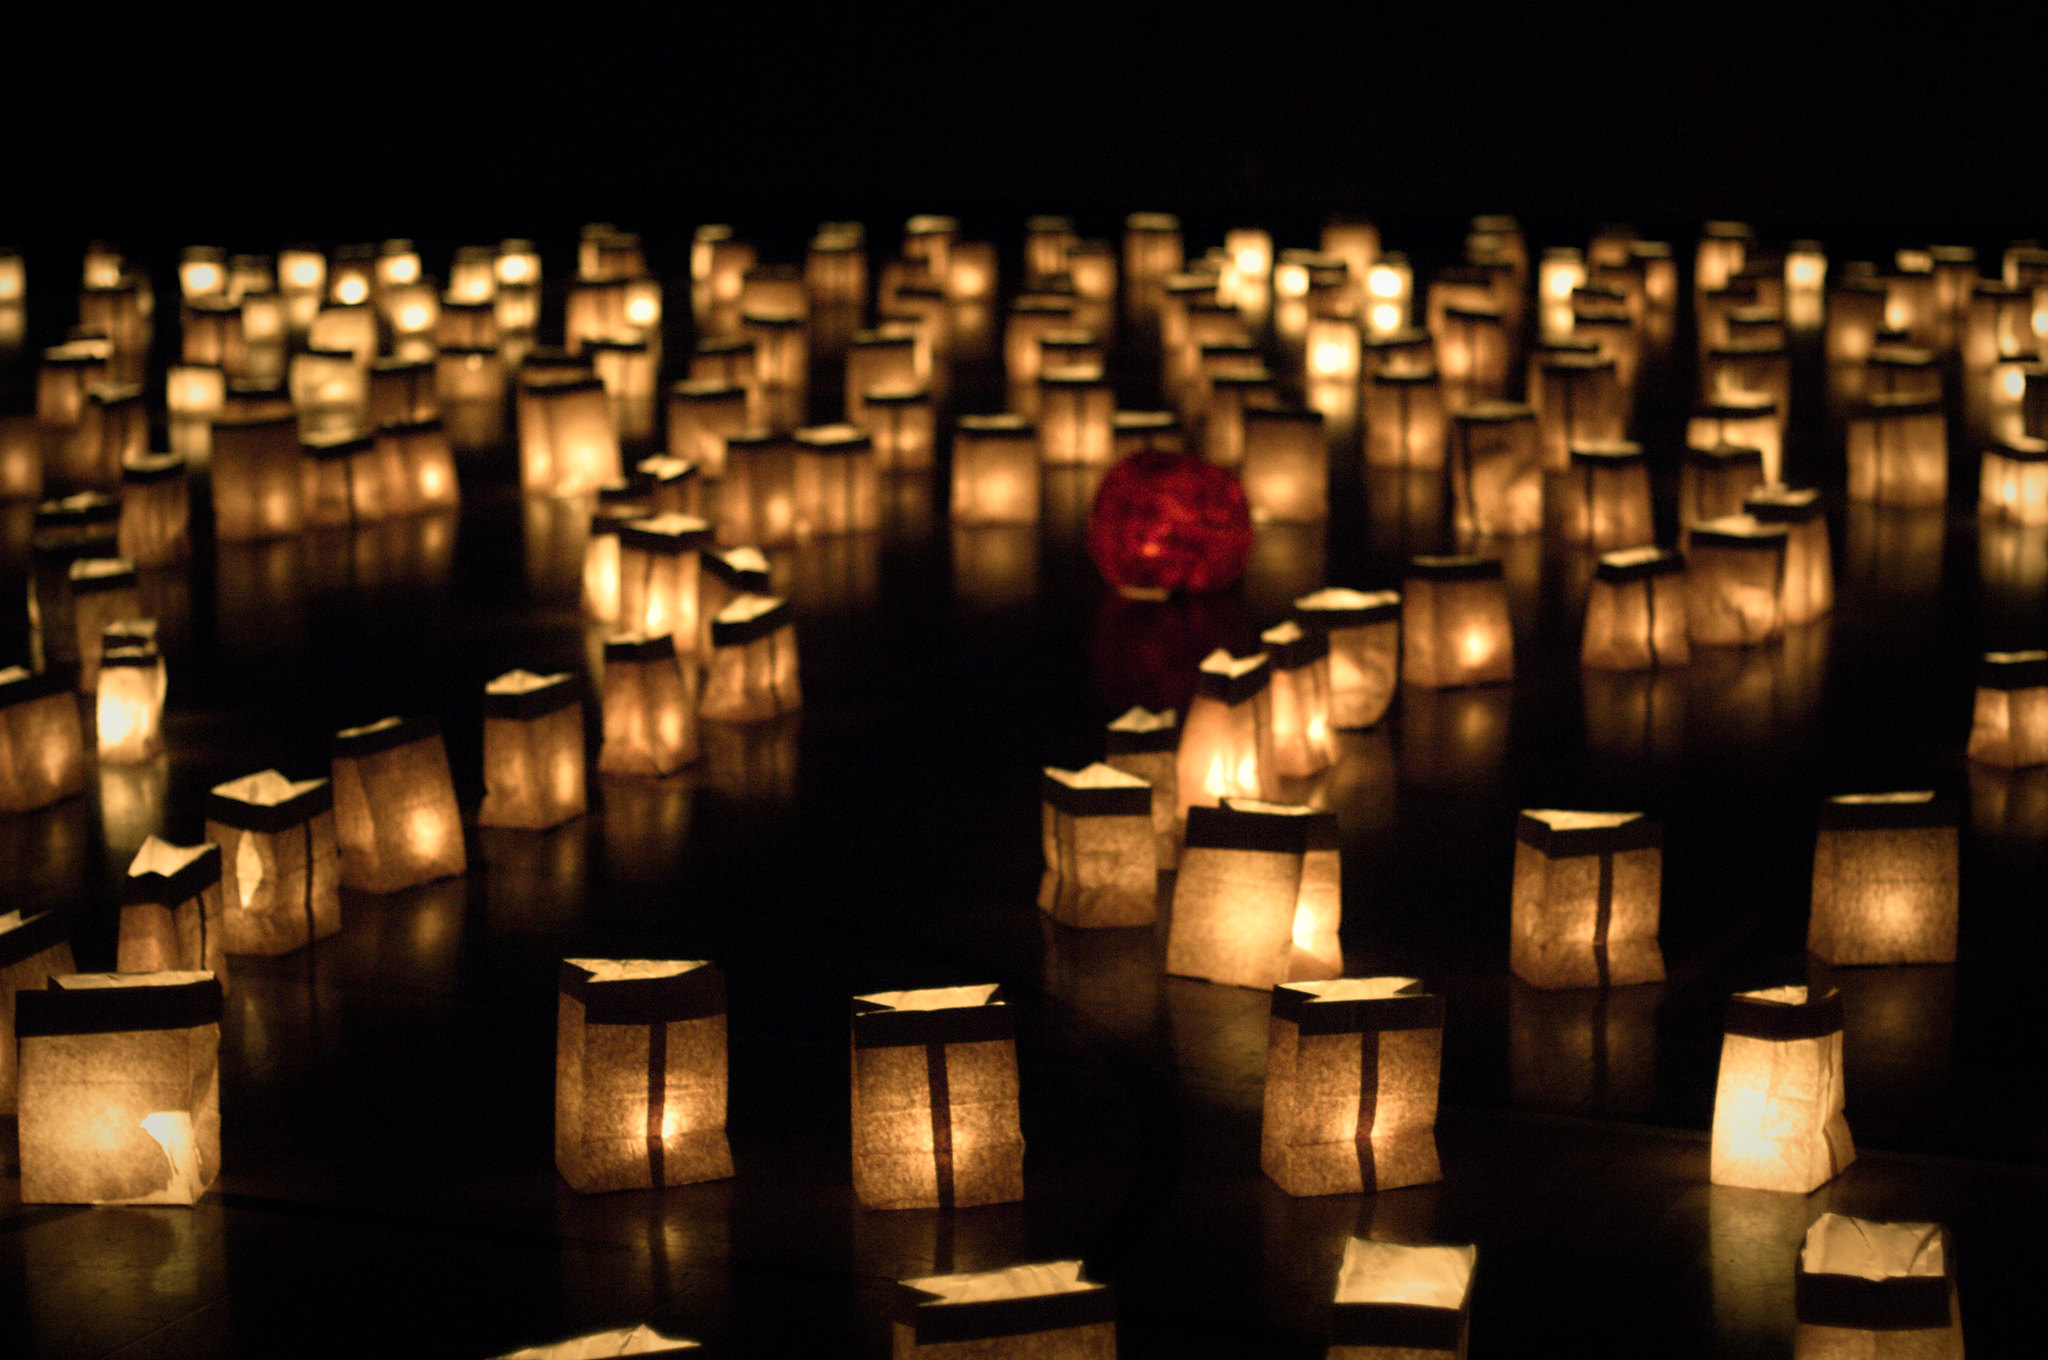 Dozens of small, square lanterns arranged in winding rows light up the darkness.